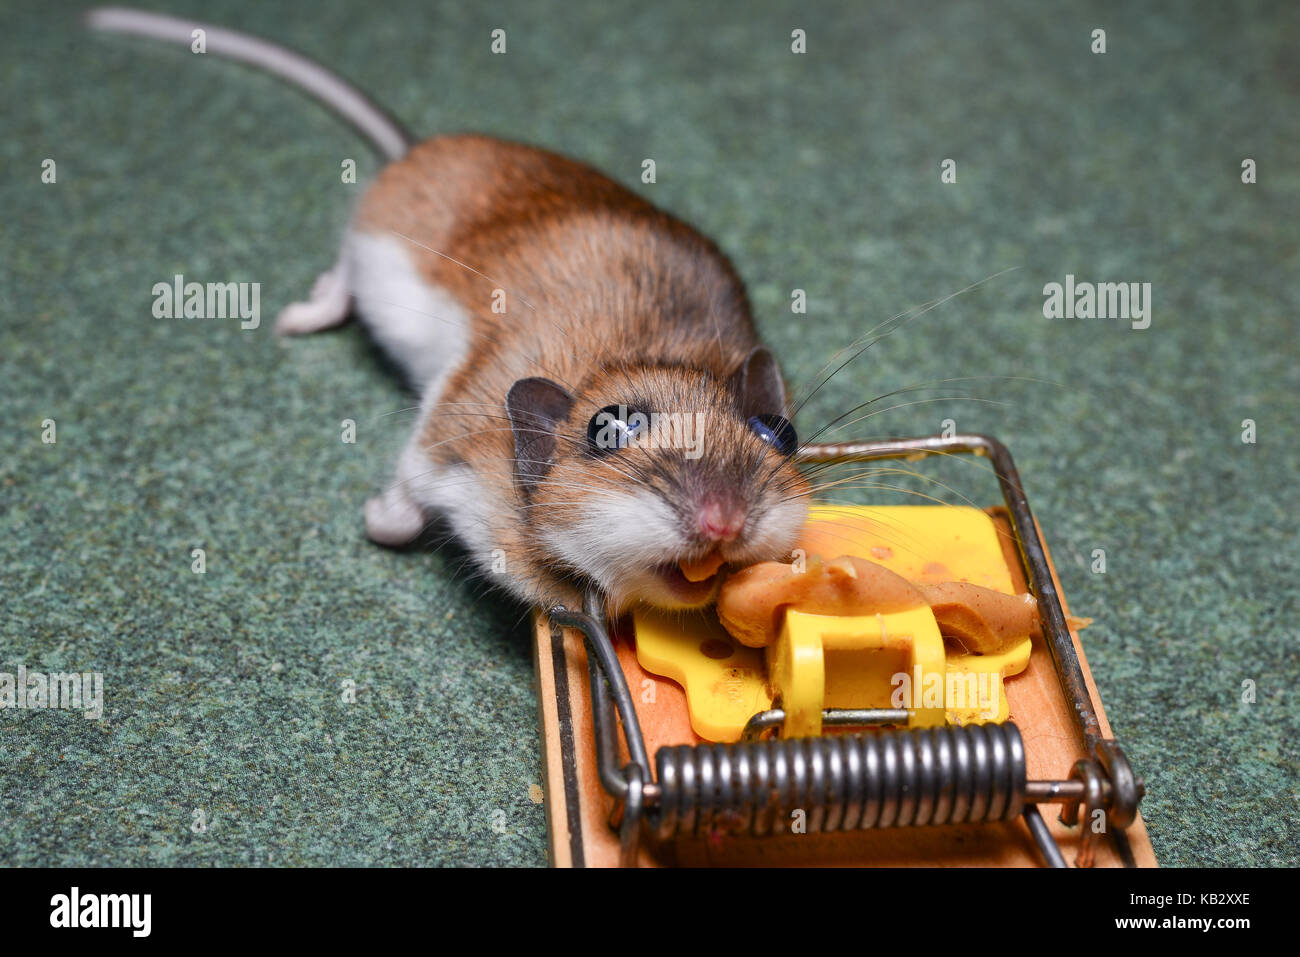 https://c8.alamy.com/comp/KB2XXE/dead-mouse-killed-in-a-mouse-trap-on-the-kitchen-counter-baited-with-KB2XXE.jpg